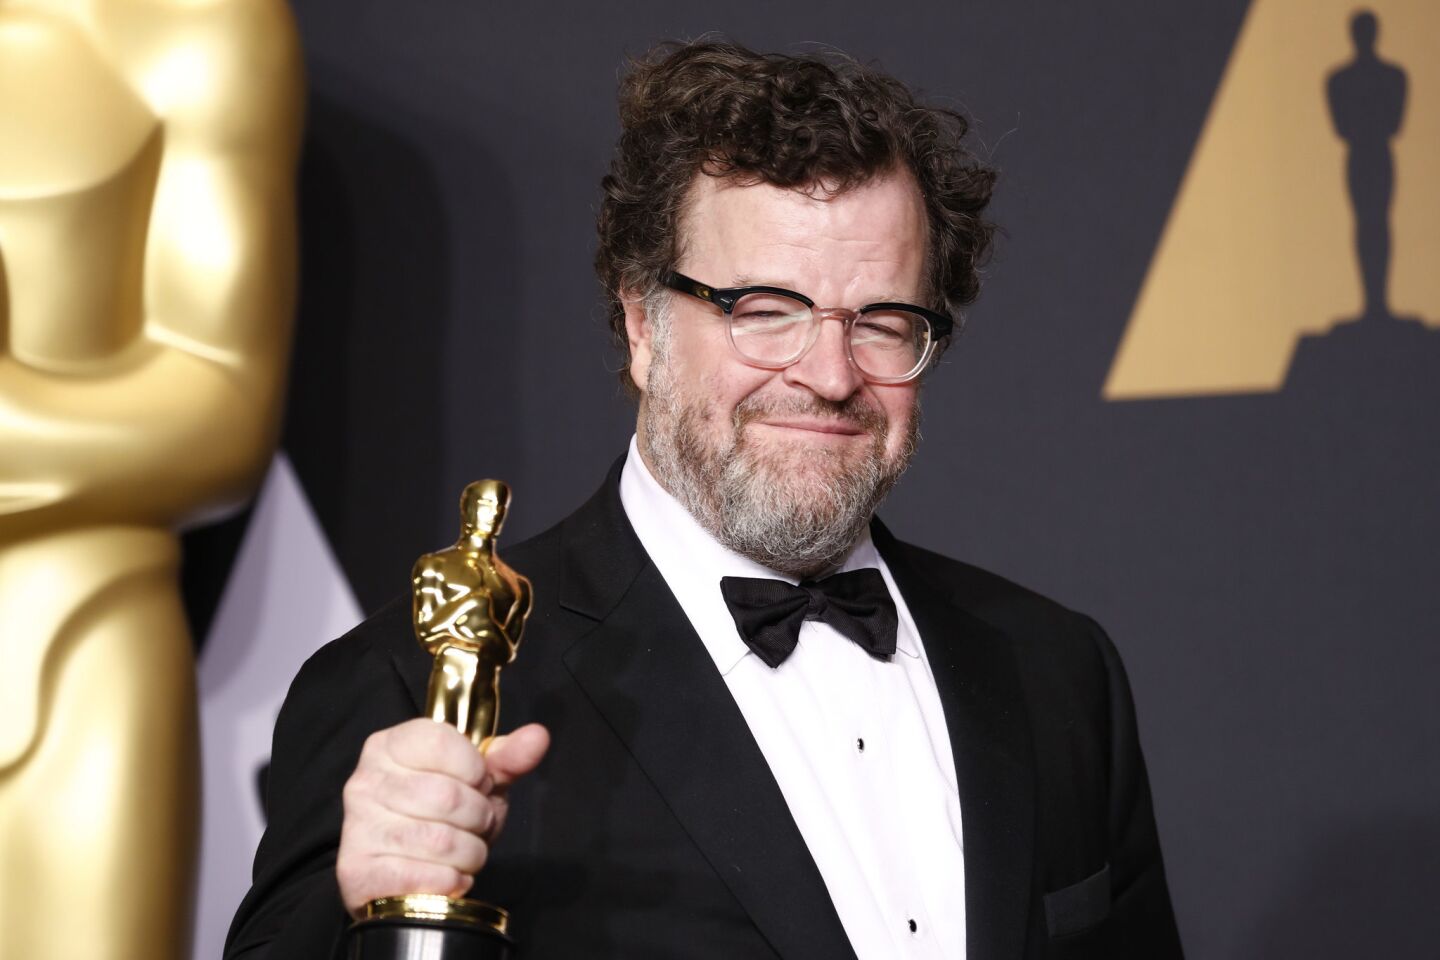 Kenneth Lonergan won original screenplay for "Manchester by the Sea."